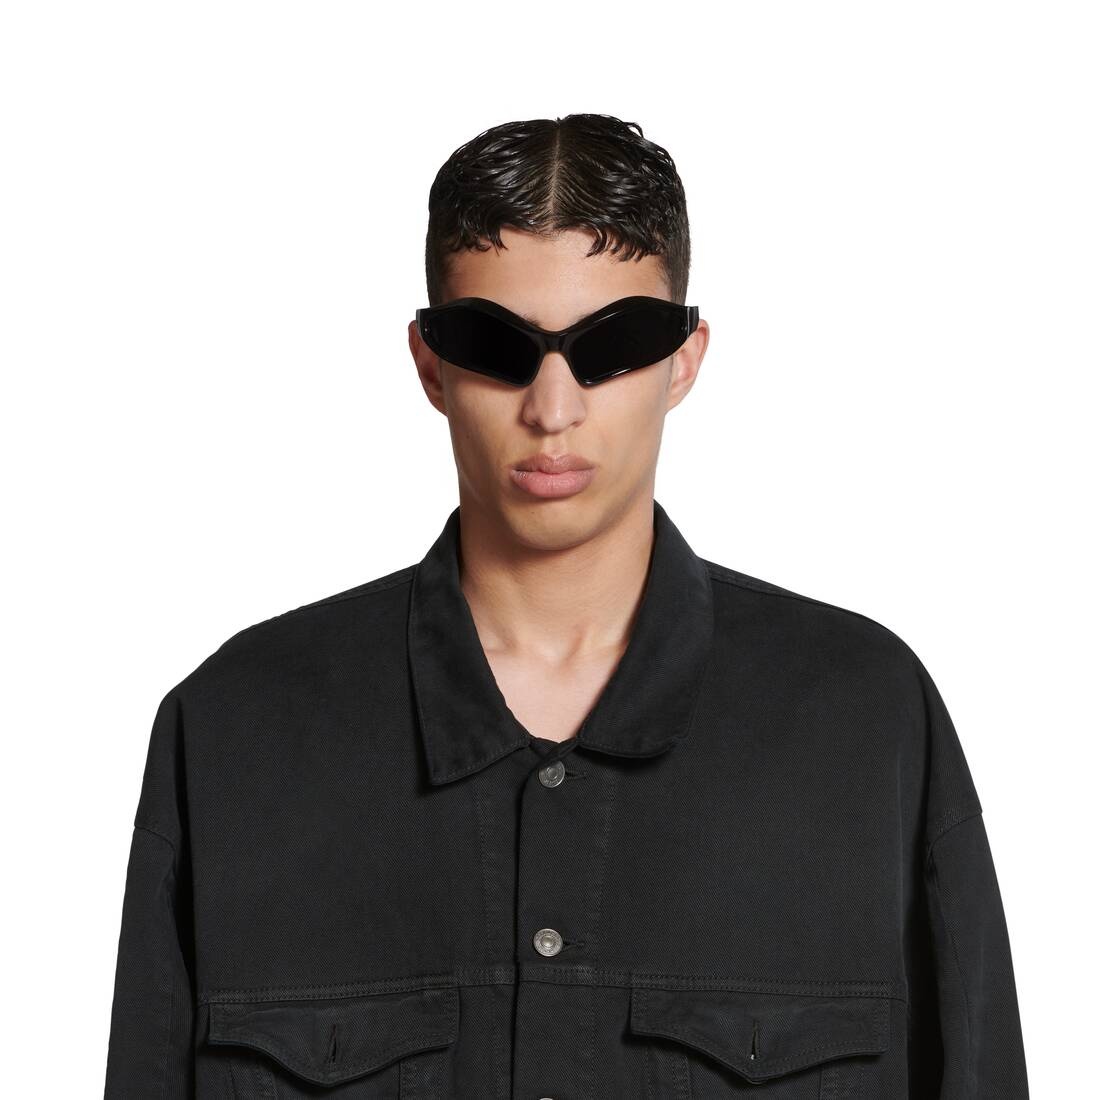 Deconstructed Jacket in Black Faded - 5